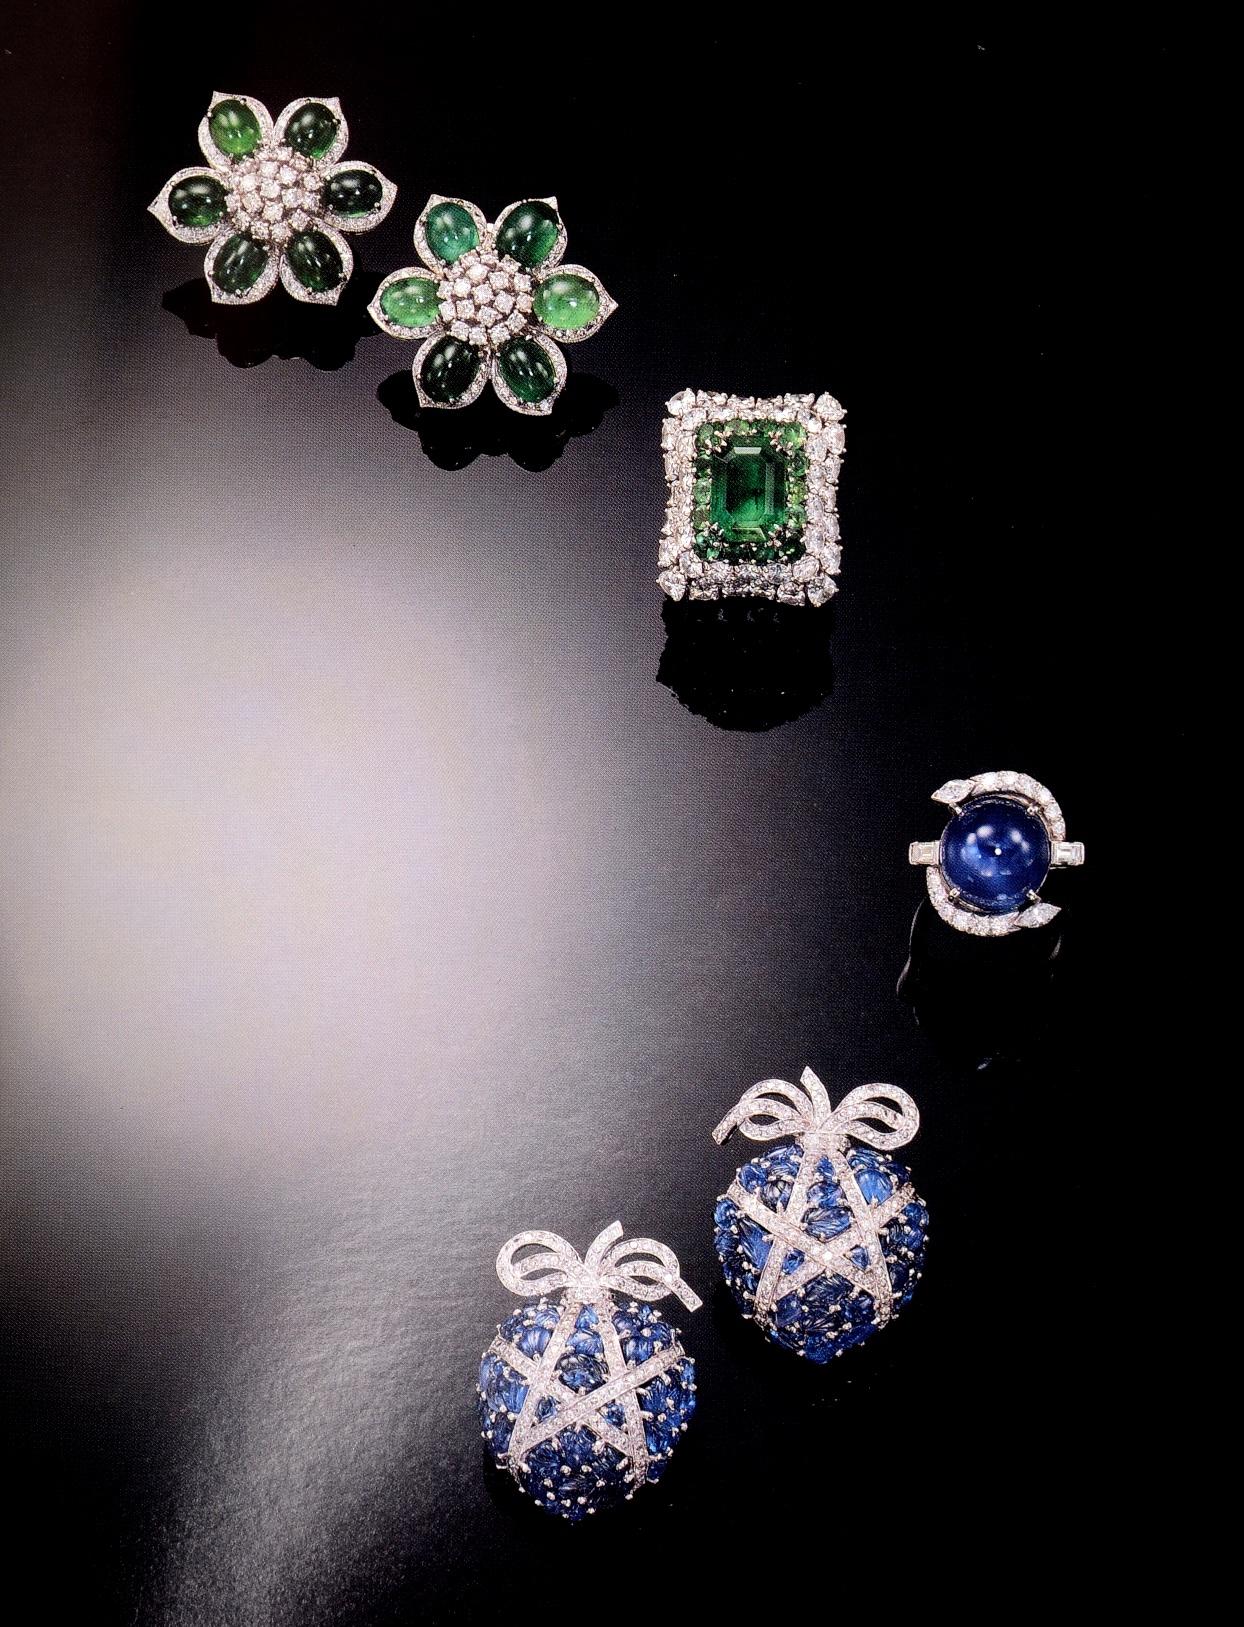 Late 20th Century Magnificent Jewelry, New York, April 22-23, 1991, Sotheby's Sale # 6163